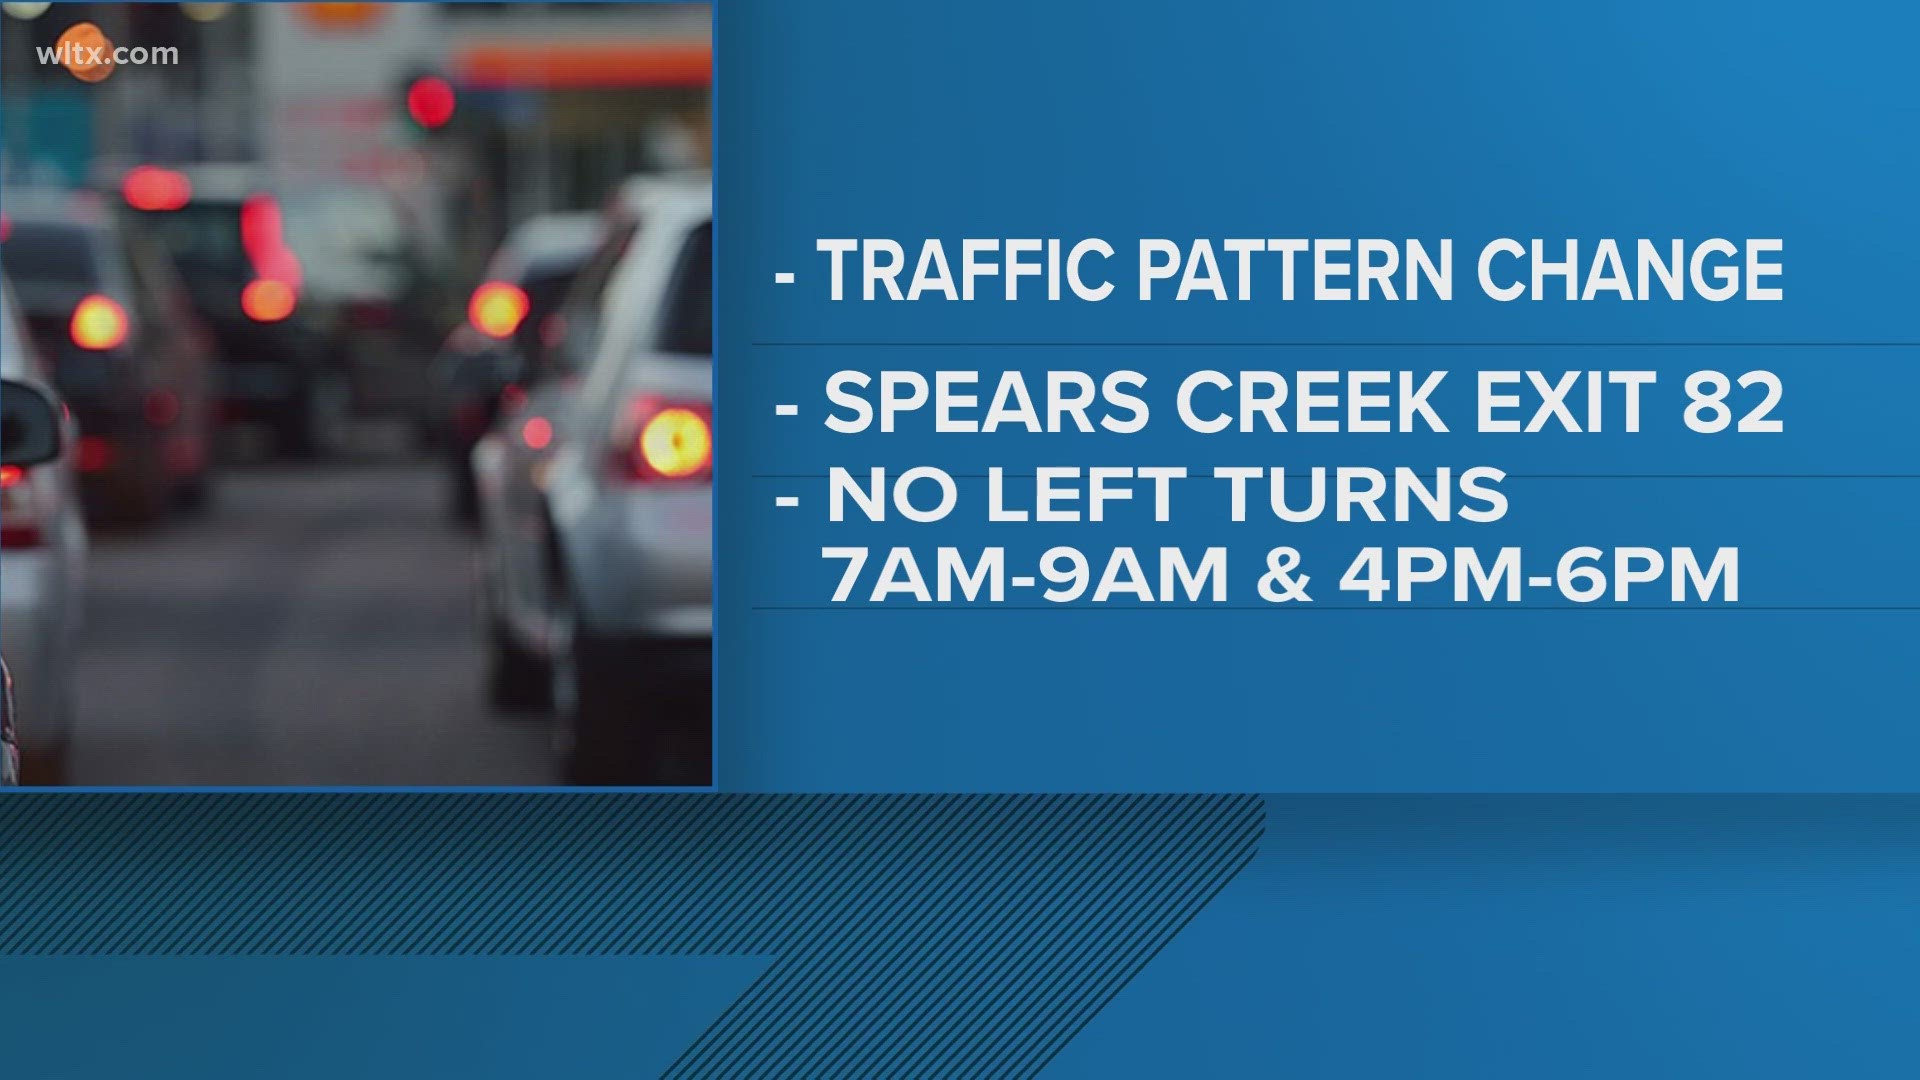 SCDOT says the elimination of left-hand turns during those times will help prevent vehicles from backing up in both directions, which can cause traffic congestion.